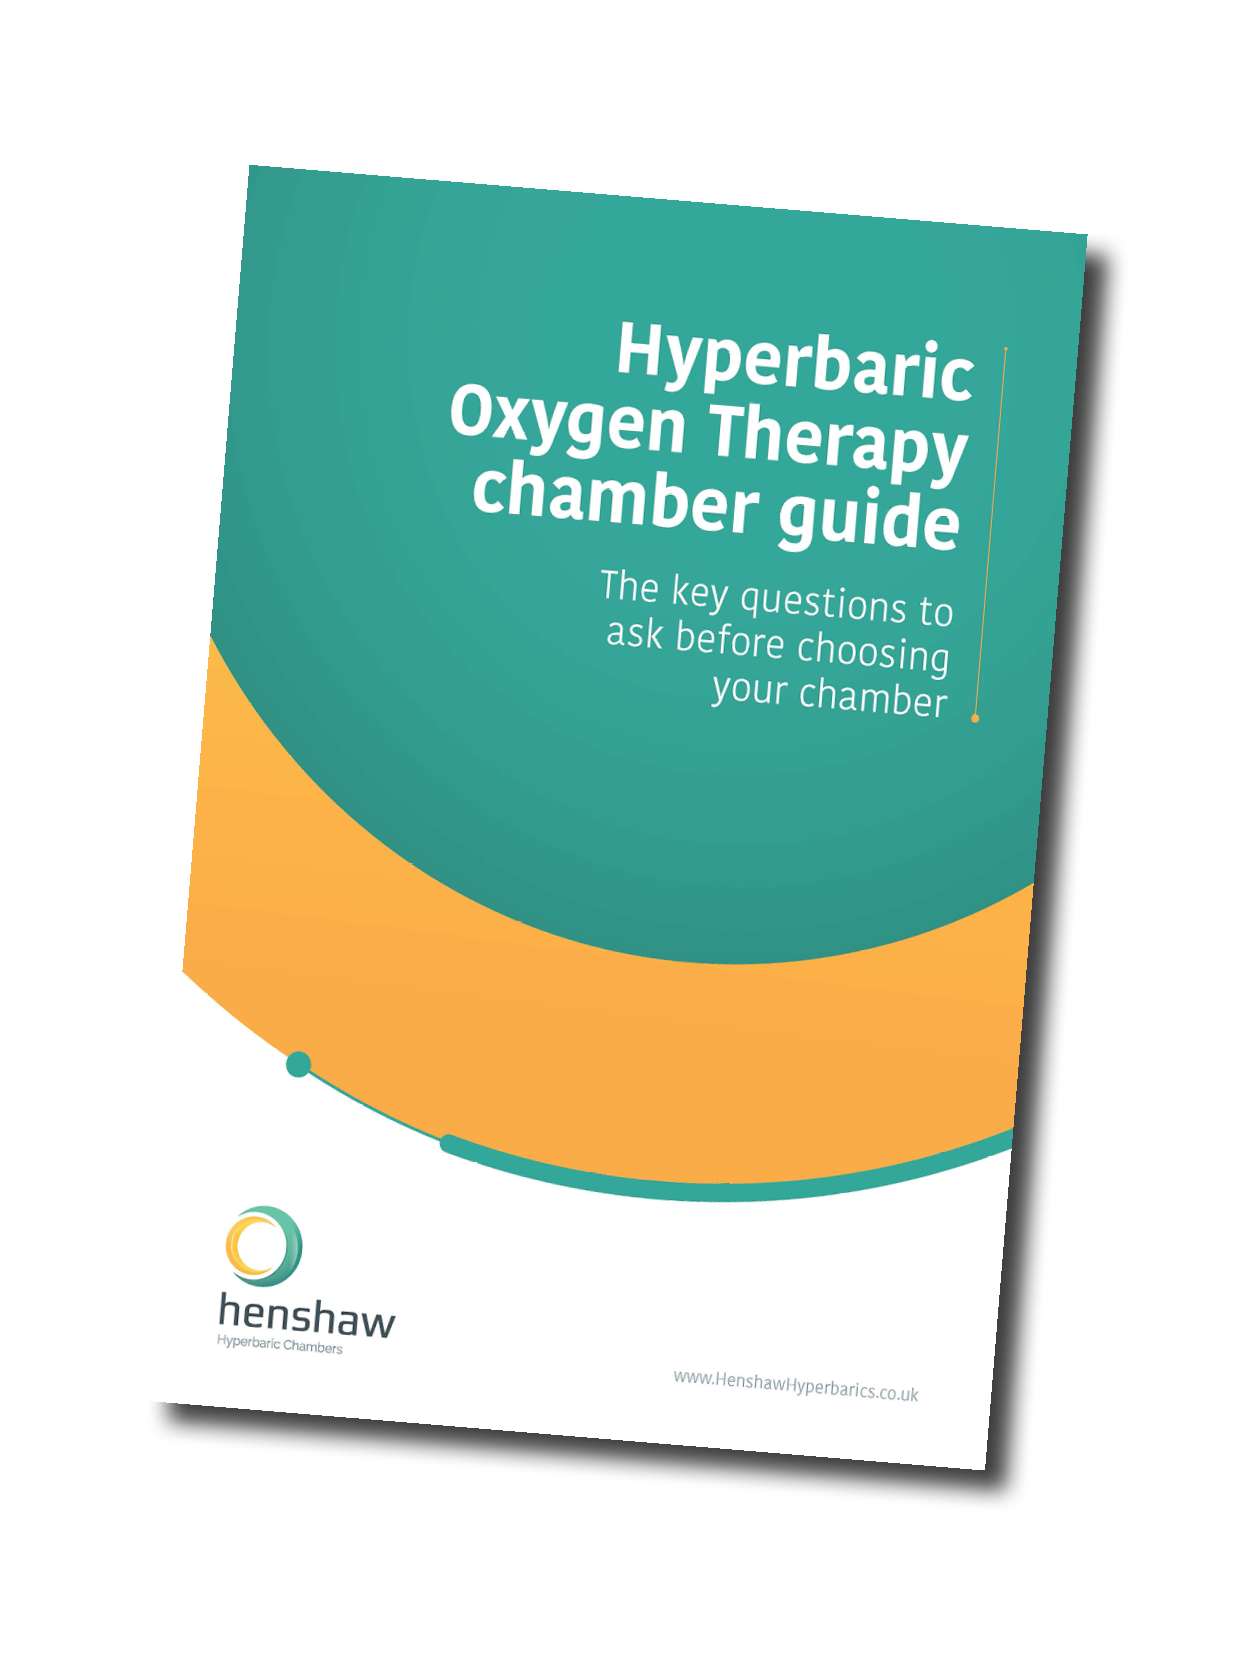 request your hyperbaric chamber guide